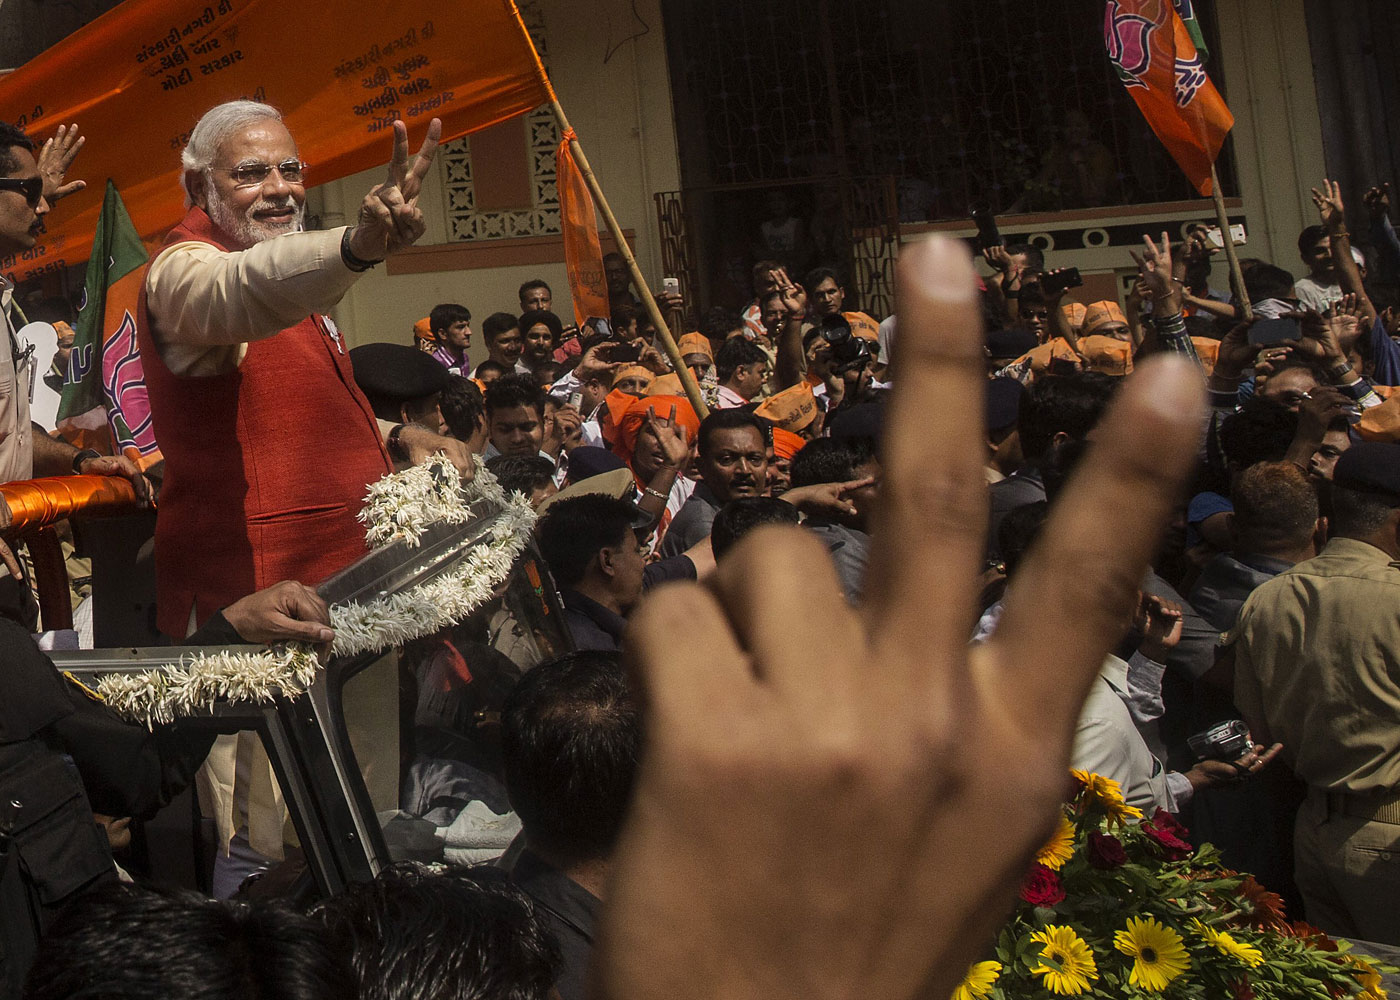 Bharatiya Janata Party leader Narendra Modi gestures to supporters as he rides in an open jeep on his way to file nomination papers on April 9, 2014 in Vadodra, India.